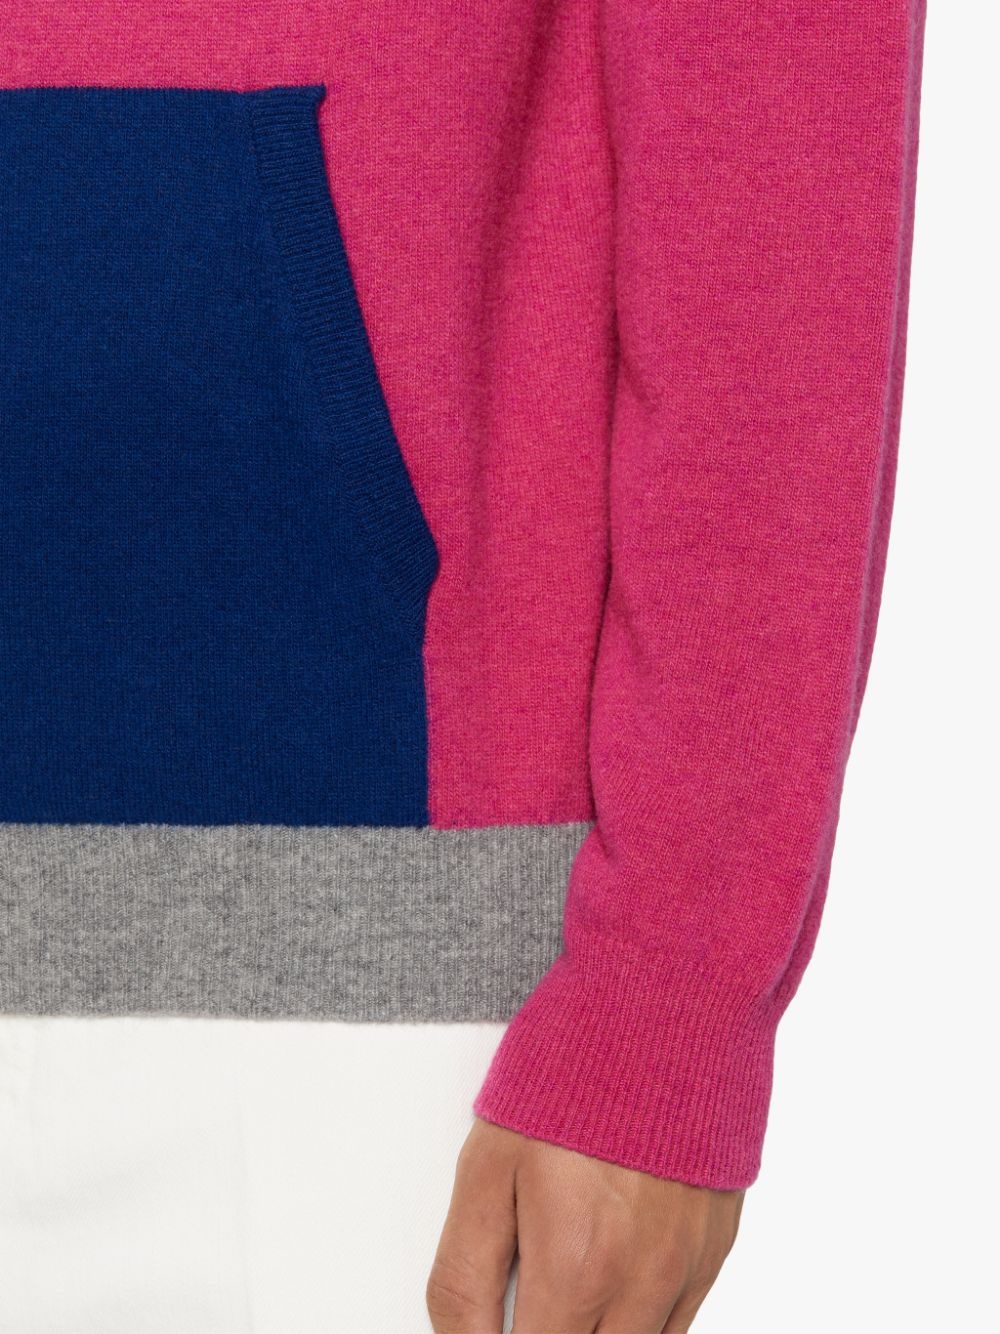 DOUBLE AGENT PINK WOOL HOODED SWEATER | GKM-201 - 6